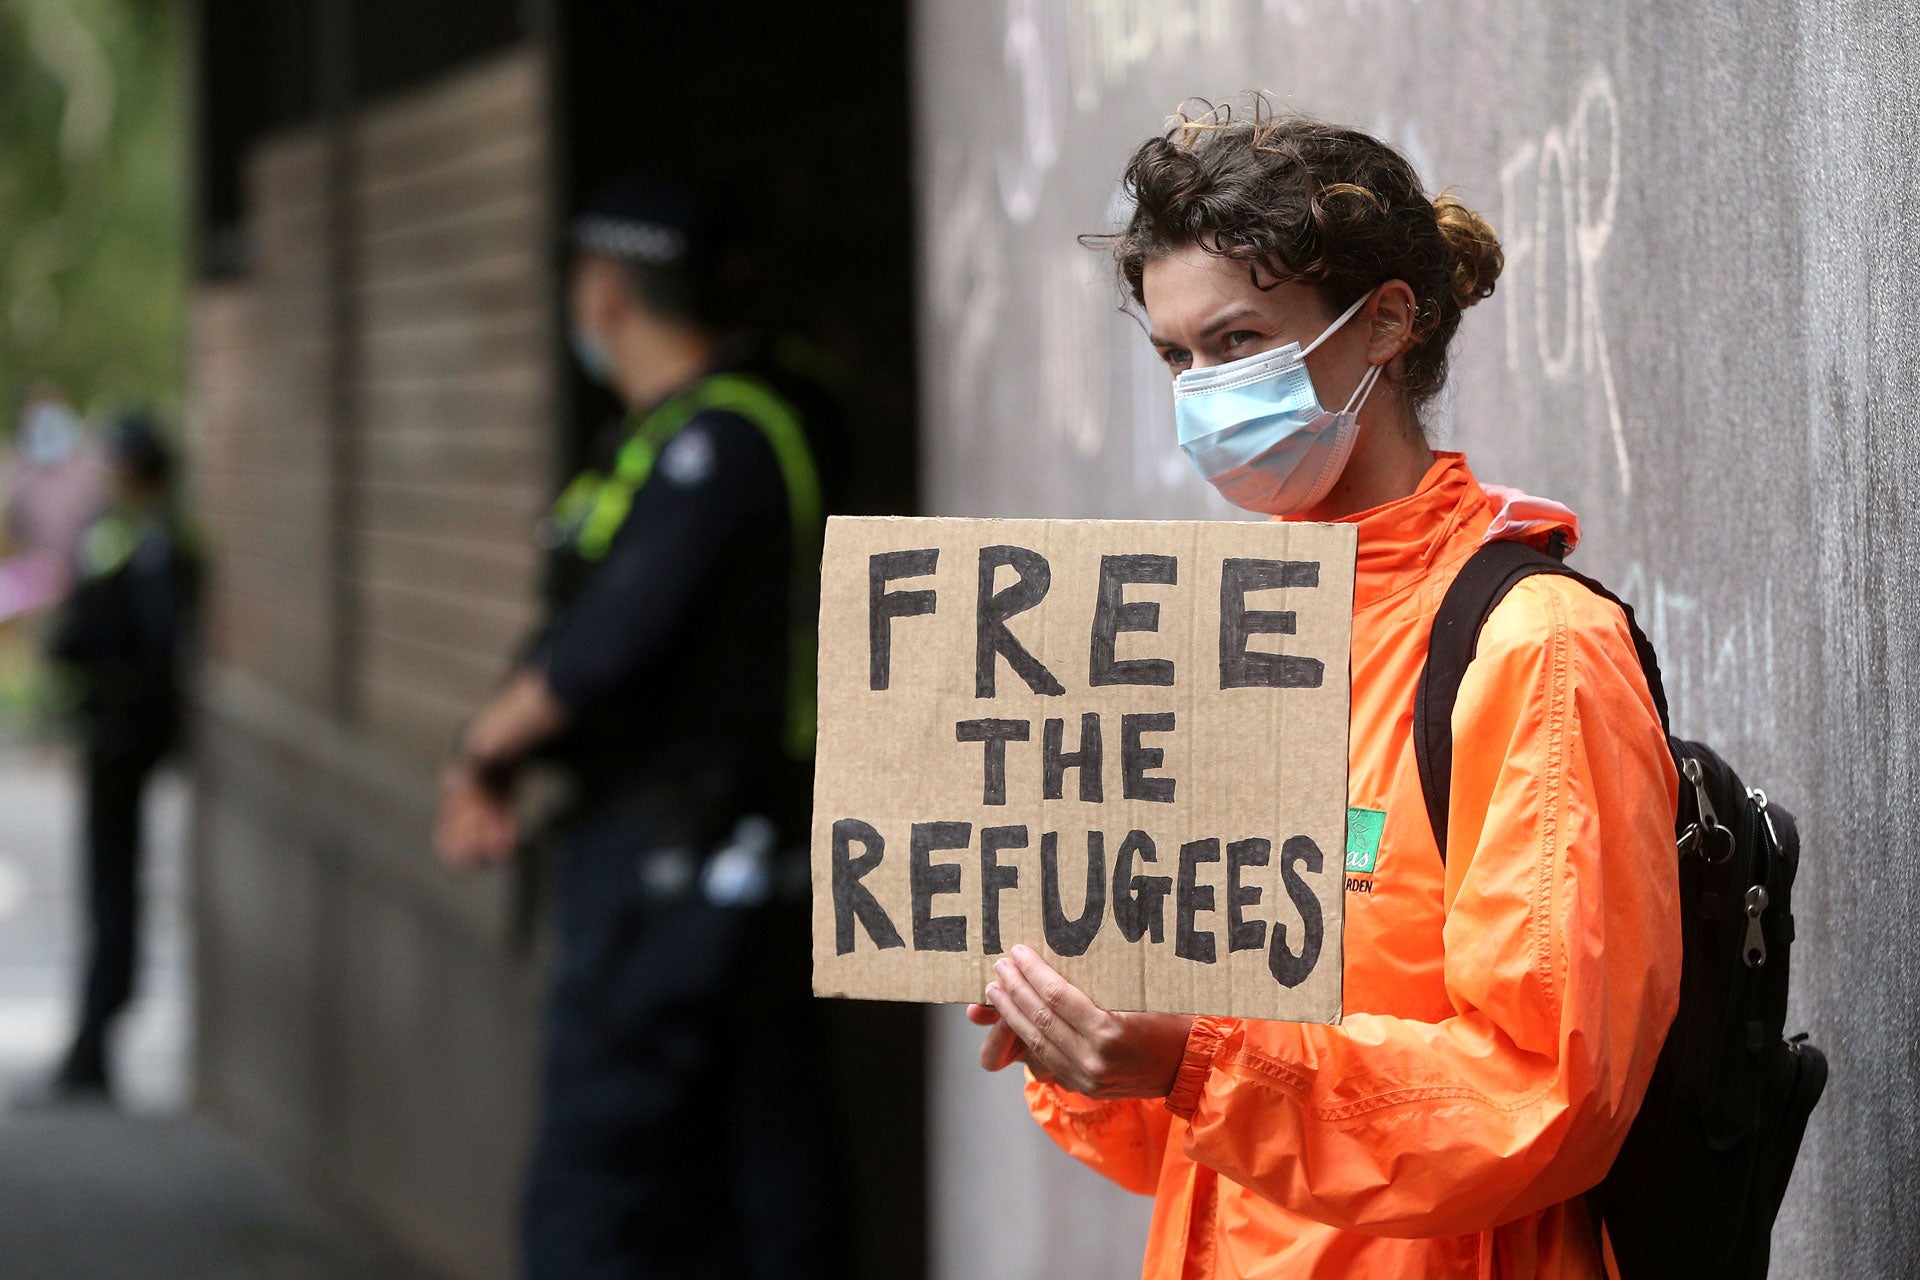 A protester holds a sign calling for the release of refugees being detained inside the Park Hotel in Melbourne, Australia